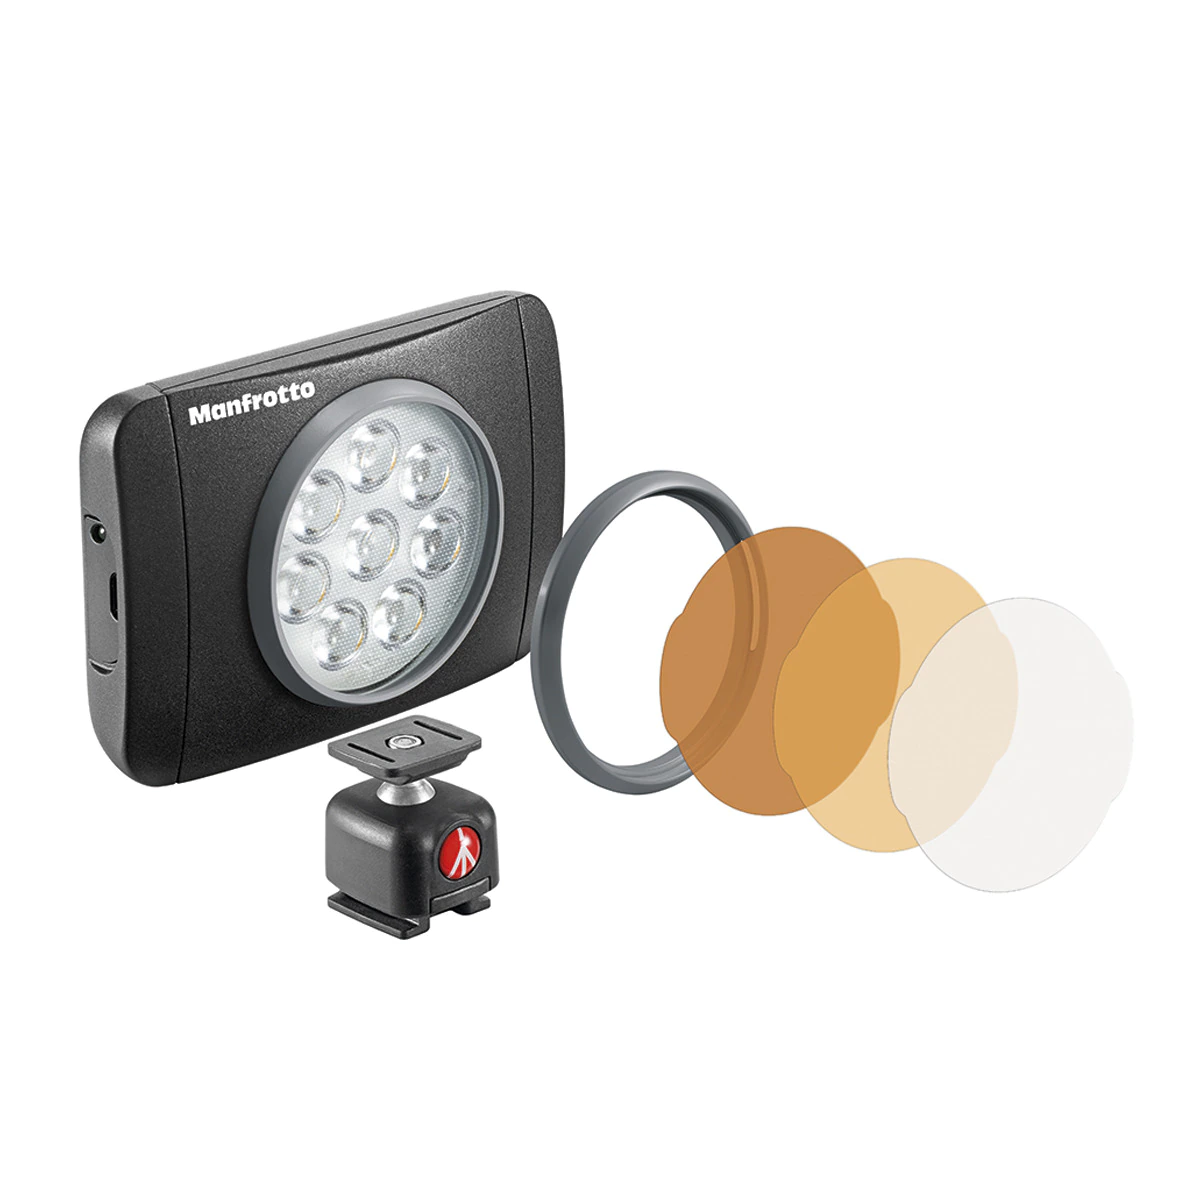 Luz LED Manfrotto Lumie Muse